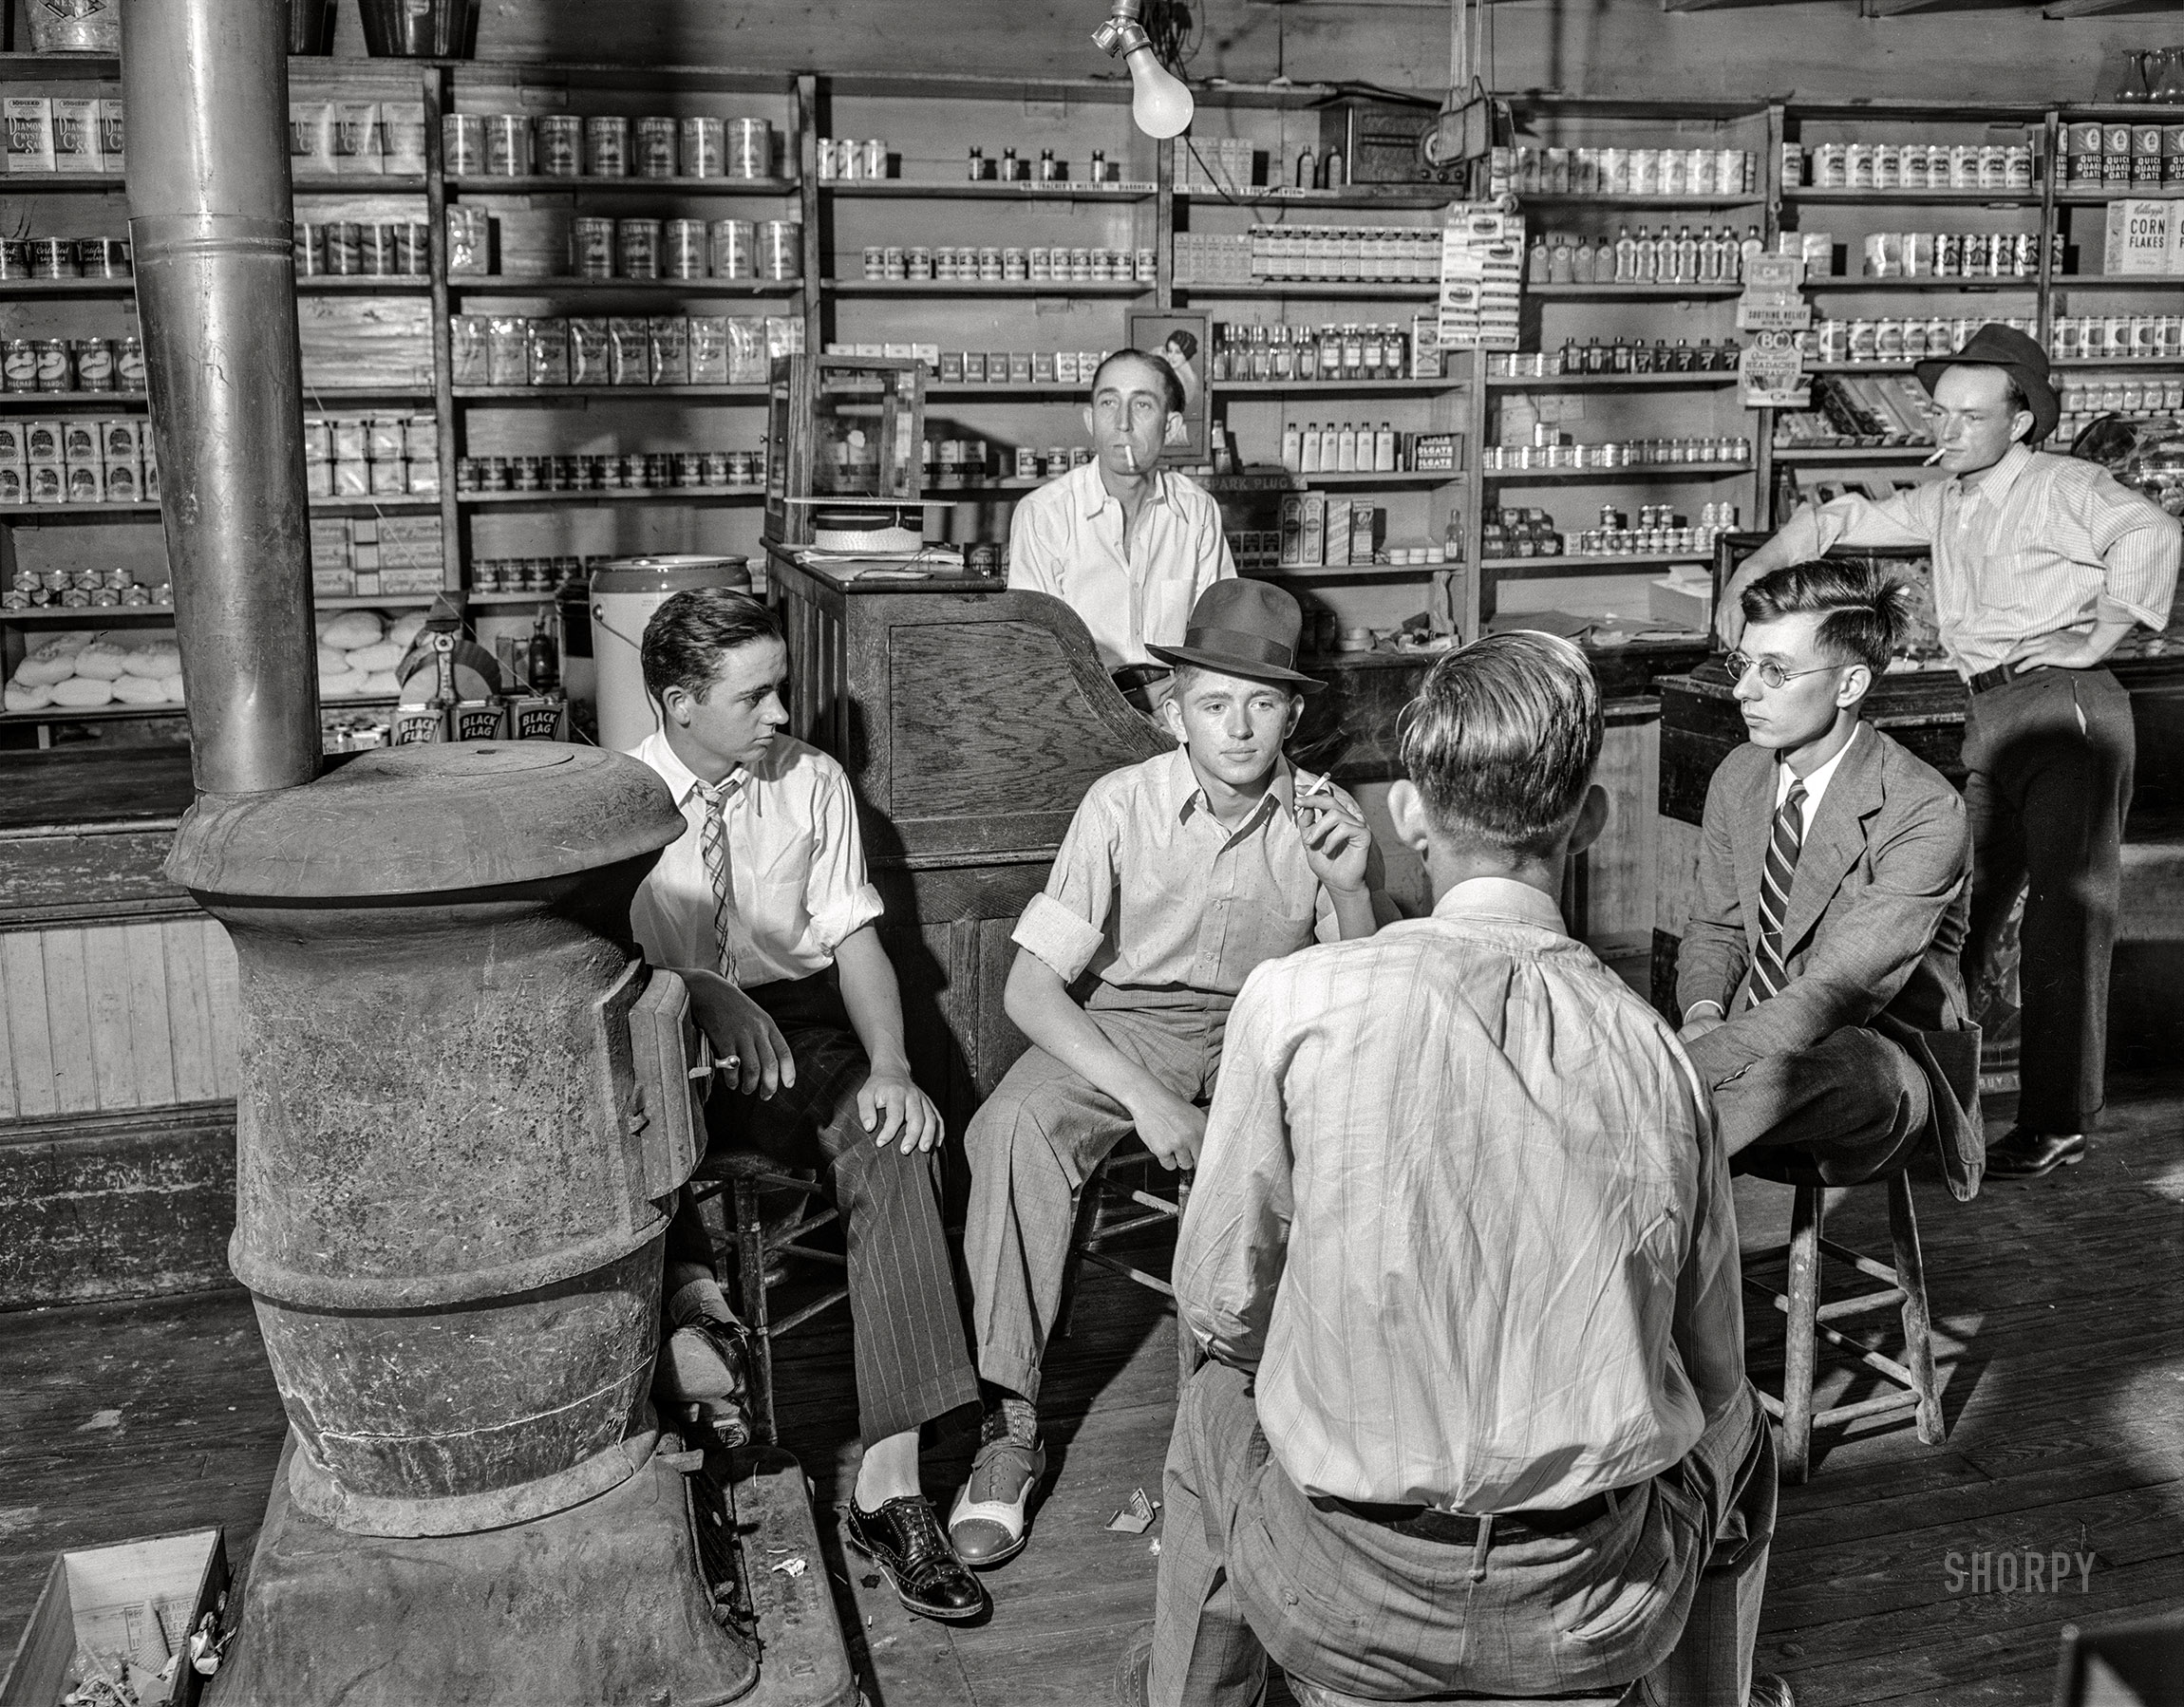 Saturday, May 25, 1940. "Interior of general store at Stem, Granville County, North Carolina, with high school boys dressed up because it's Election Day." Medium format acetate negative by Jack Delano for the Farm Security Administration. View full size.